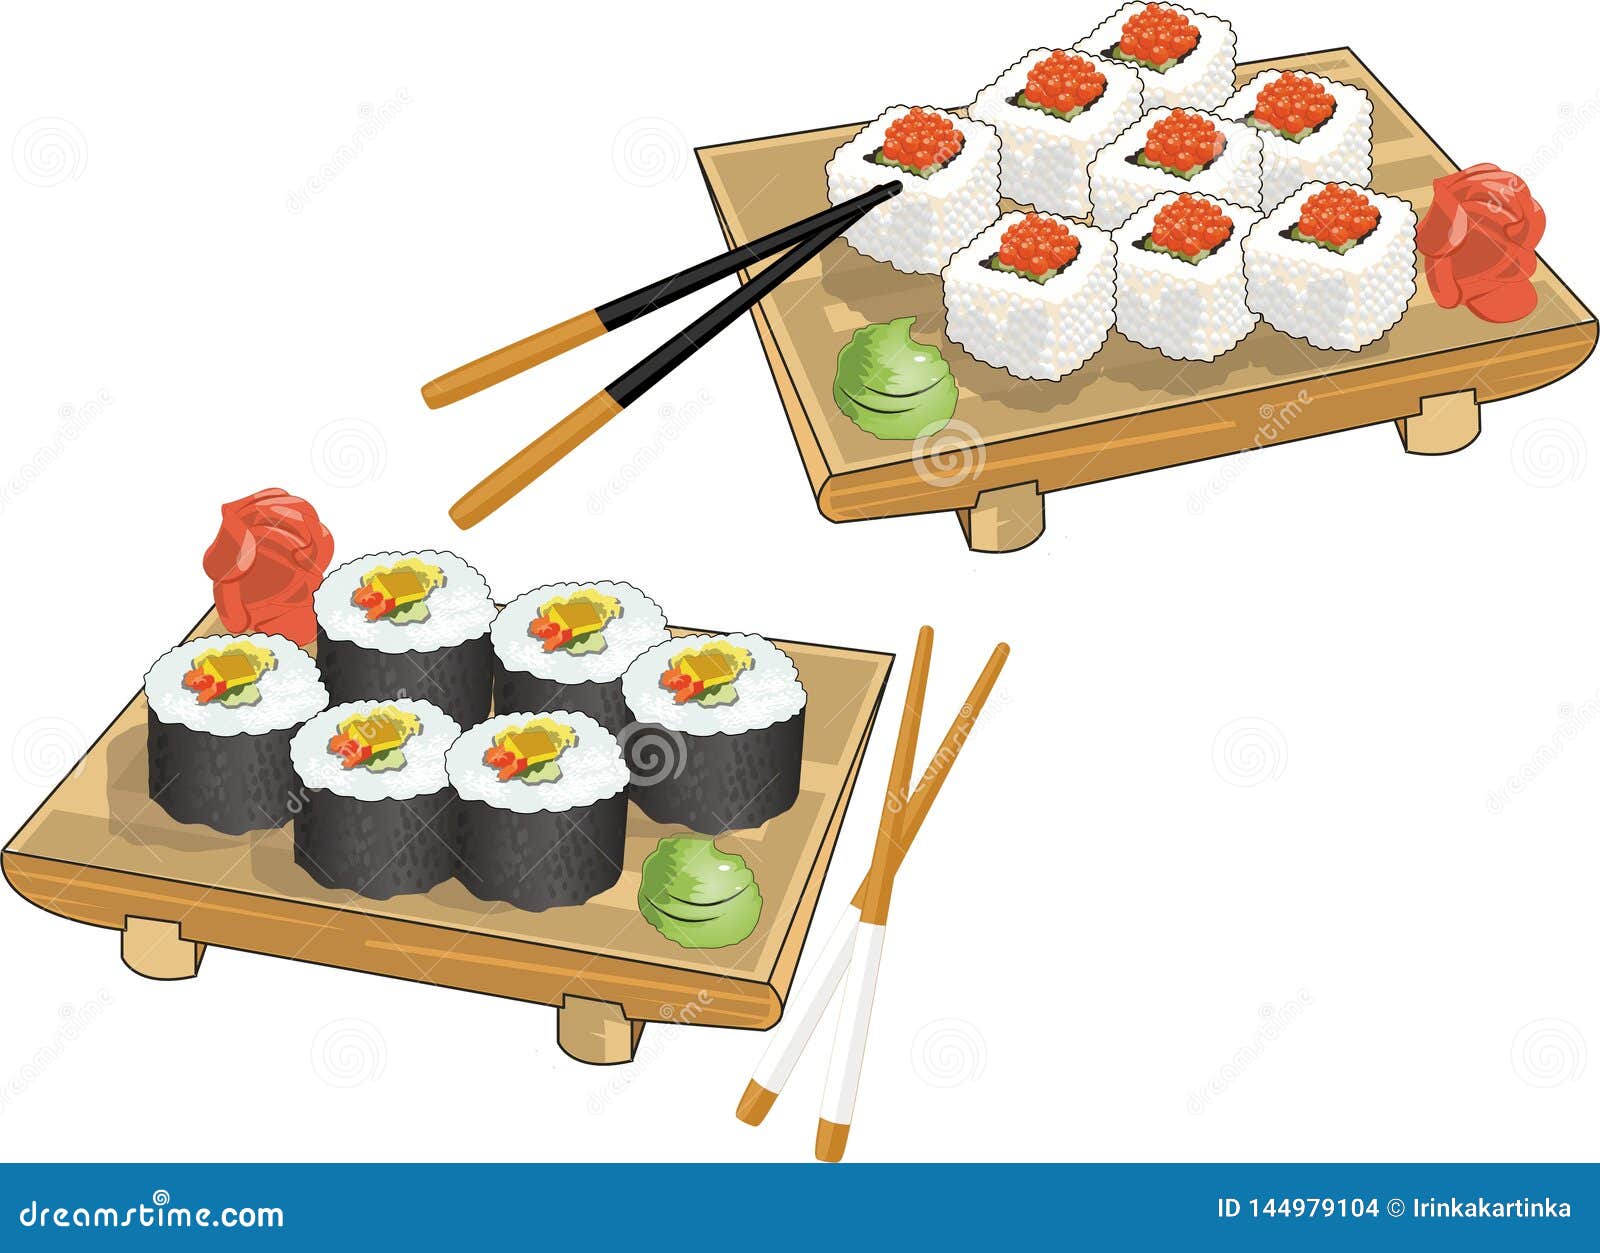 https://thumbs.dreamstime.com/z/realistic-picture-set-sushi-roll-chopsticks-wooden-tray-fast-food-restaurant-144979104.jpg